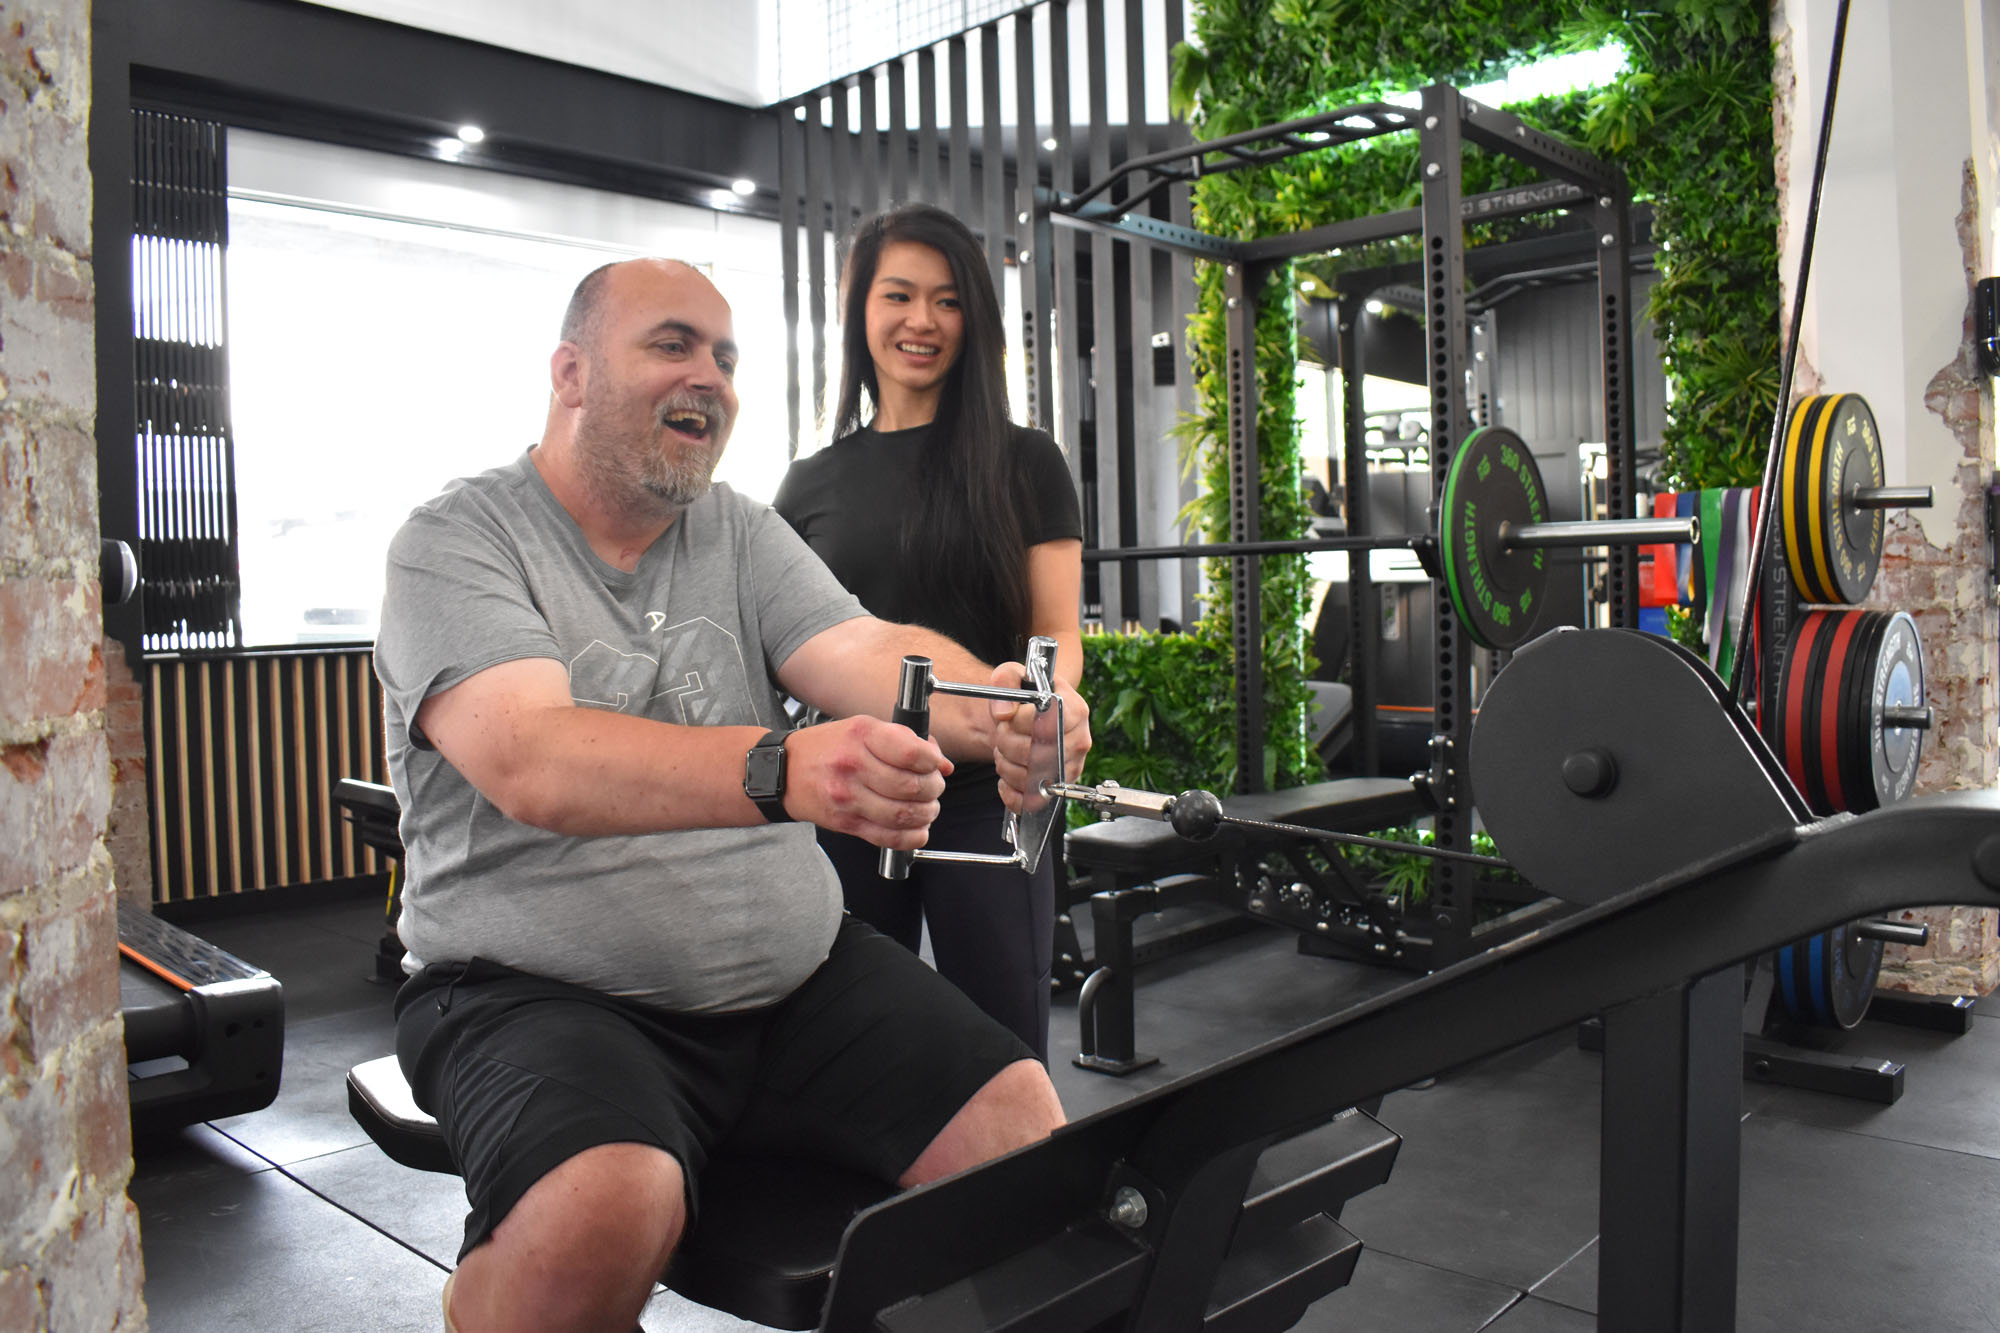 All our rehab classes are run by qualified physiotherapists who can tailor each exercise to your needs. Whether you are in it for fitness or rehab, we can find a class to suit you!